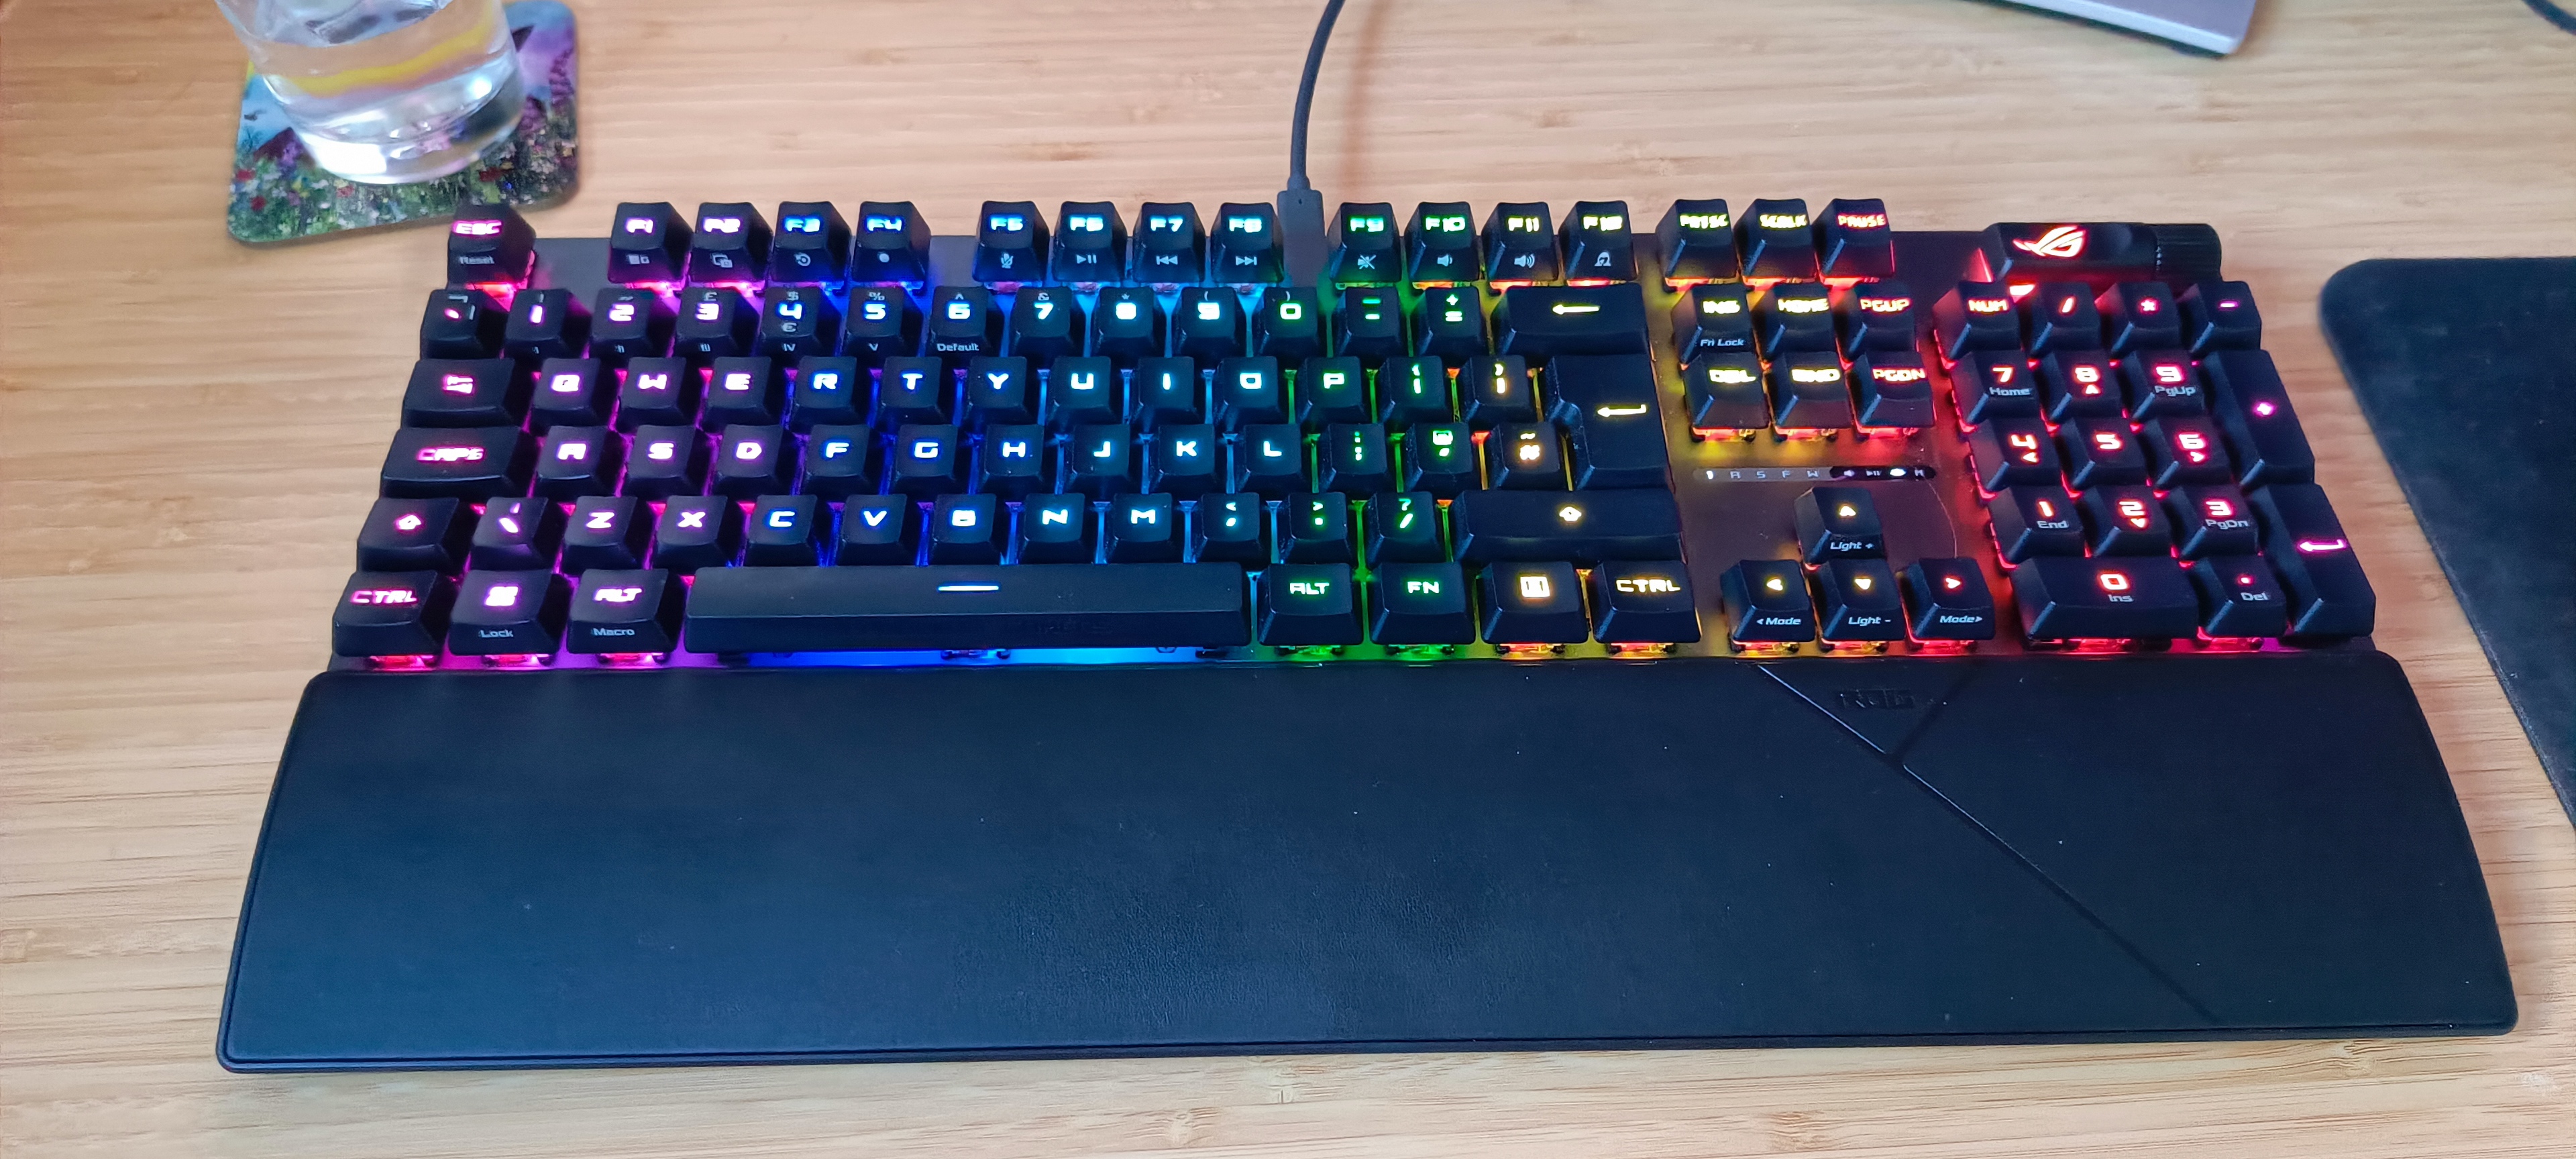 ASUS ROG Strix Scope RX Review: A Surprisingly Fun Keyboard